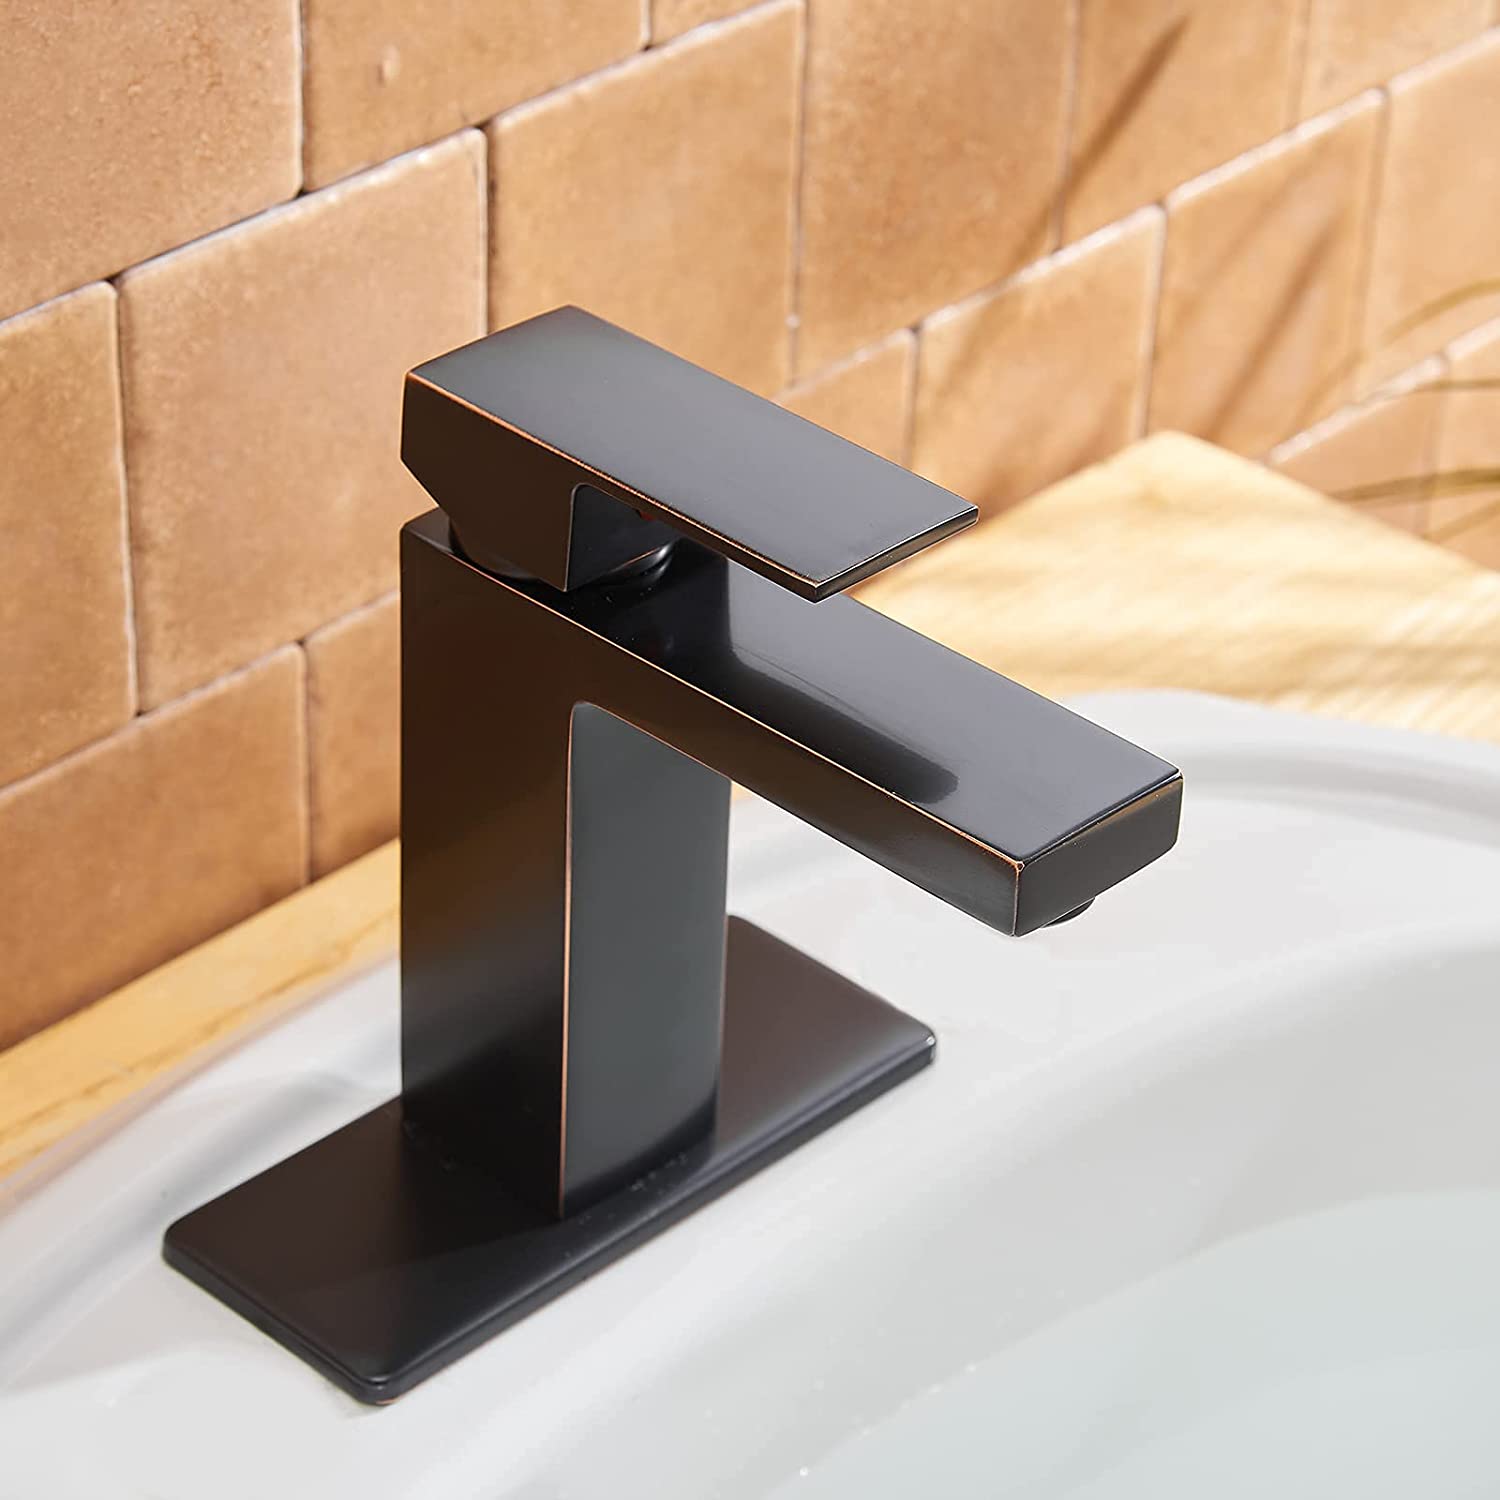 BWE Oil Rubbed Bronze Bathroom Sink Faucet Single Hole Modern Single Handle Bathroom Faucet with Pop Up Drain Assembly with Overflow and Supply Line Vanity Bath Mixer Tap Faucet Lead-Free - image 2 of 7